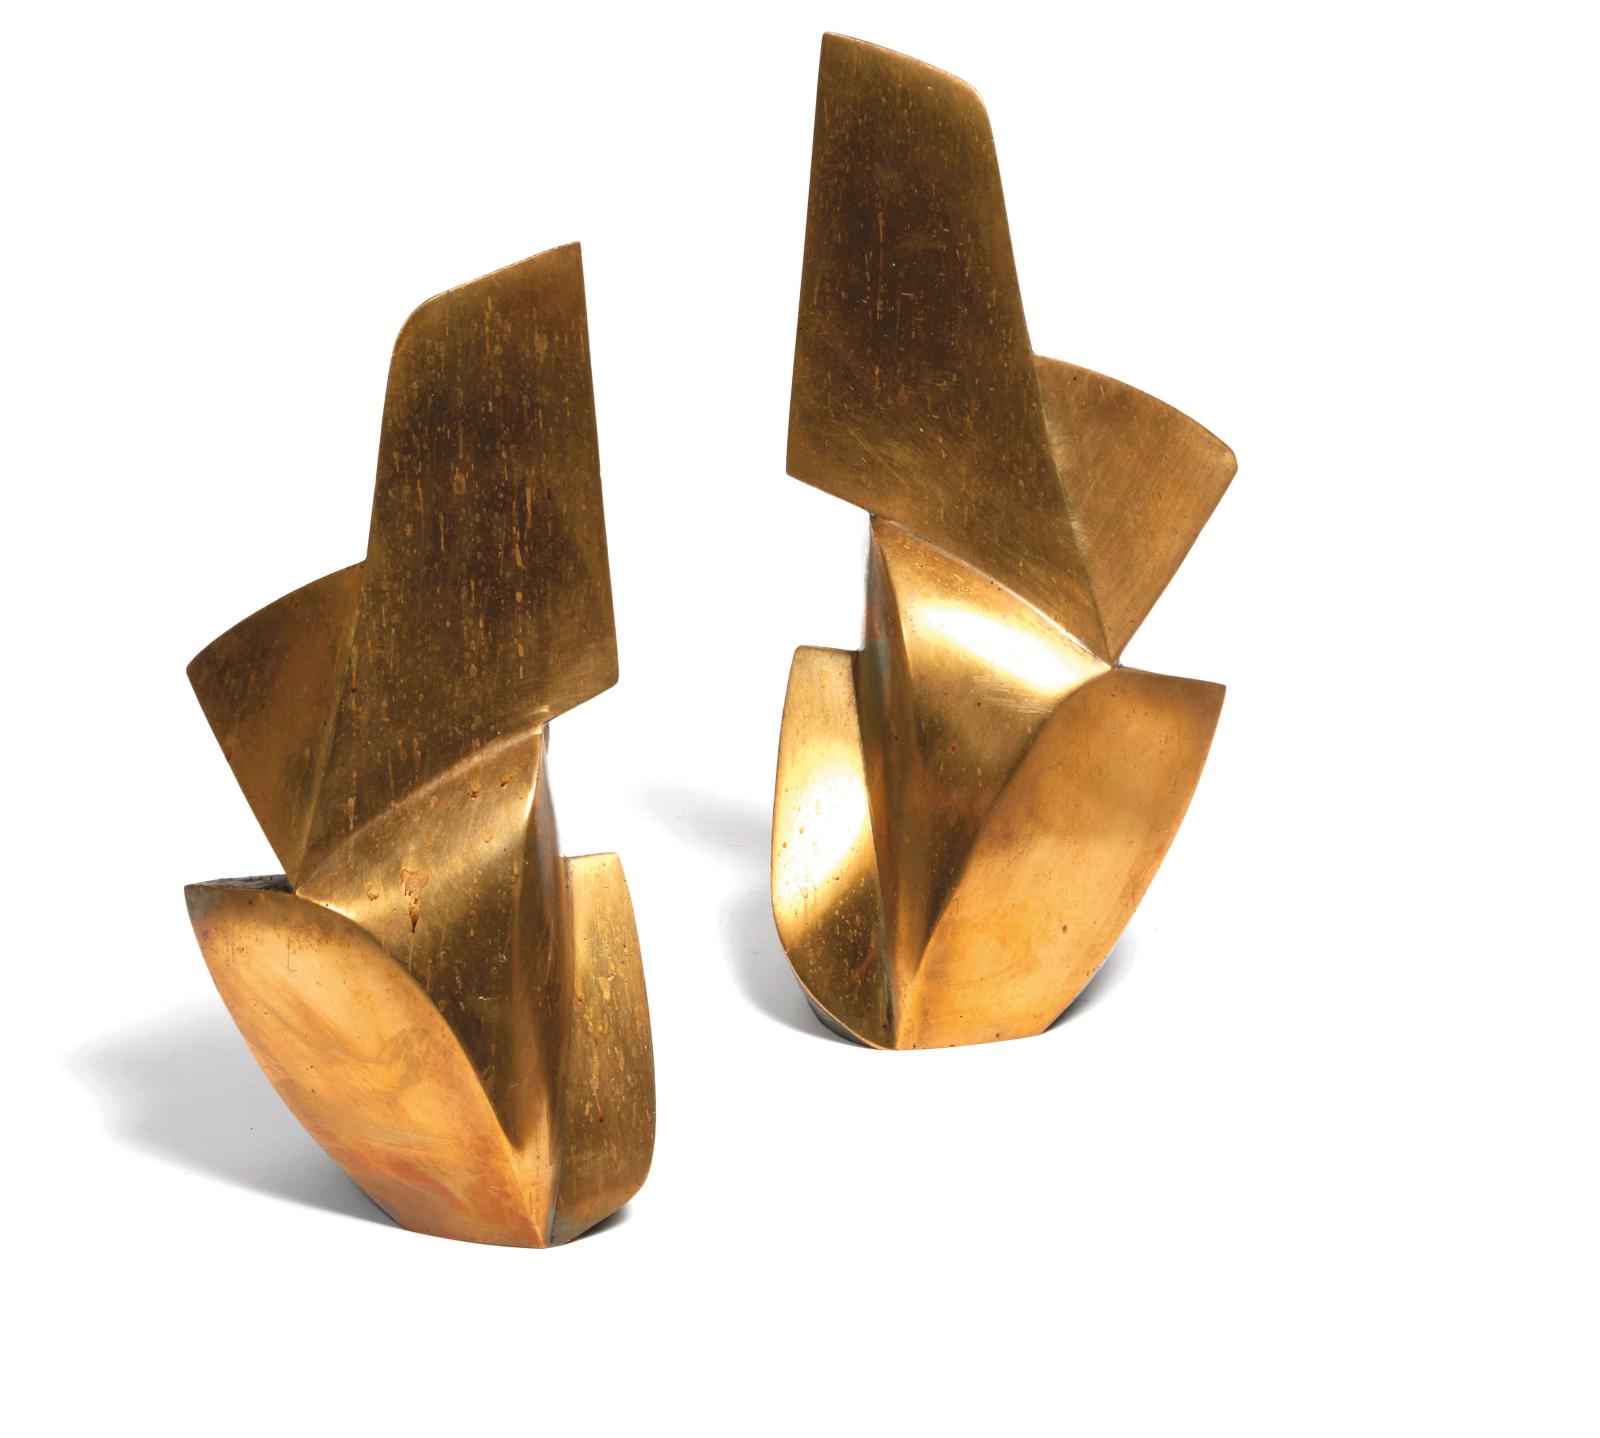 Valentine Schlegel (1925-2021), pair of polished gilt bronze andirons with wrought iron log holders and head supports, 1968, edition of three, 37 x 13 x 24 cm/14.6 x 5.1 x 9.4 in. Result: €86,360